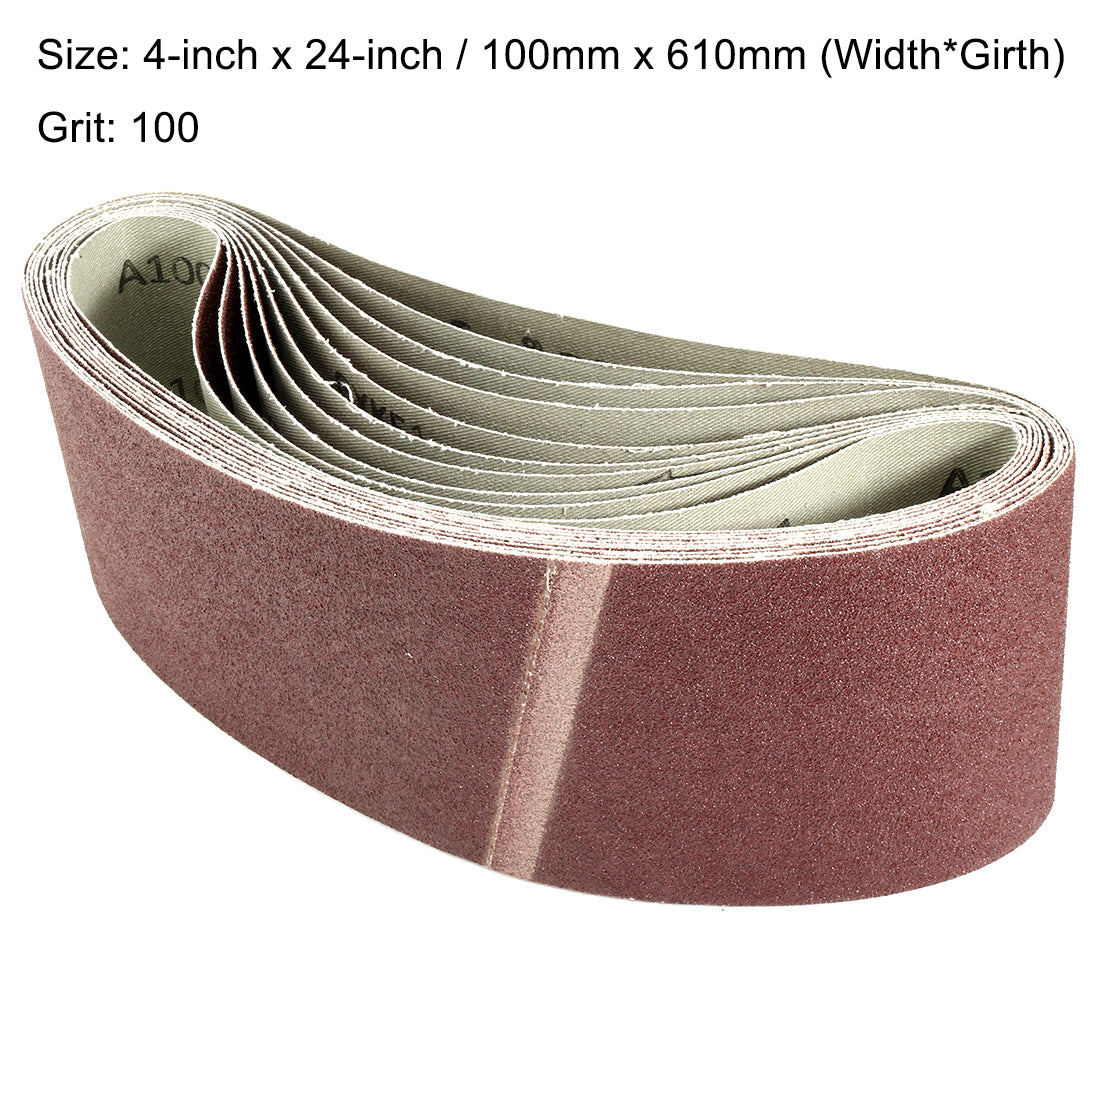 uxcell Uxcell 4-Inch x 24-Inch Aluminum Oxide Sanding Belt 100 Grits Lapped Joint 10pcs